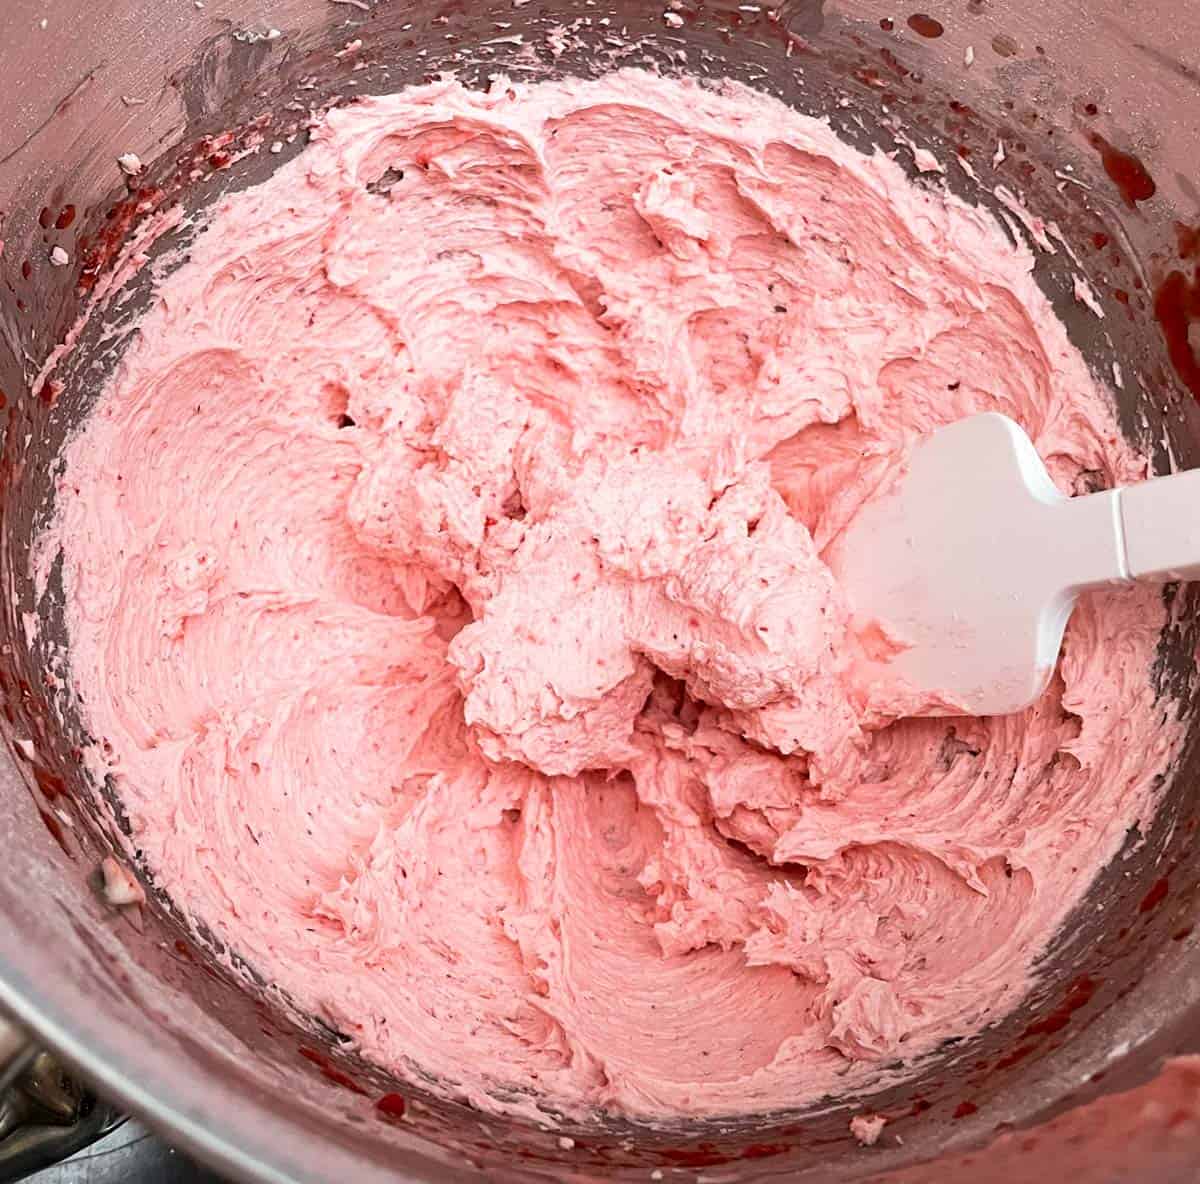 Strawberry icing in the mixer bowl.